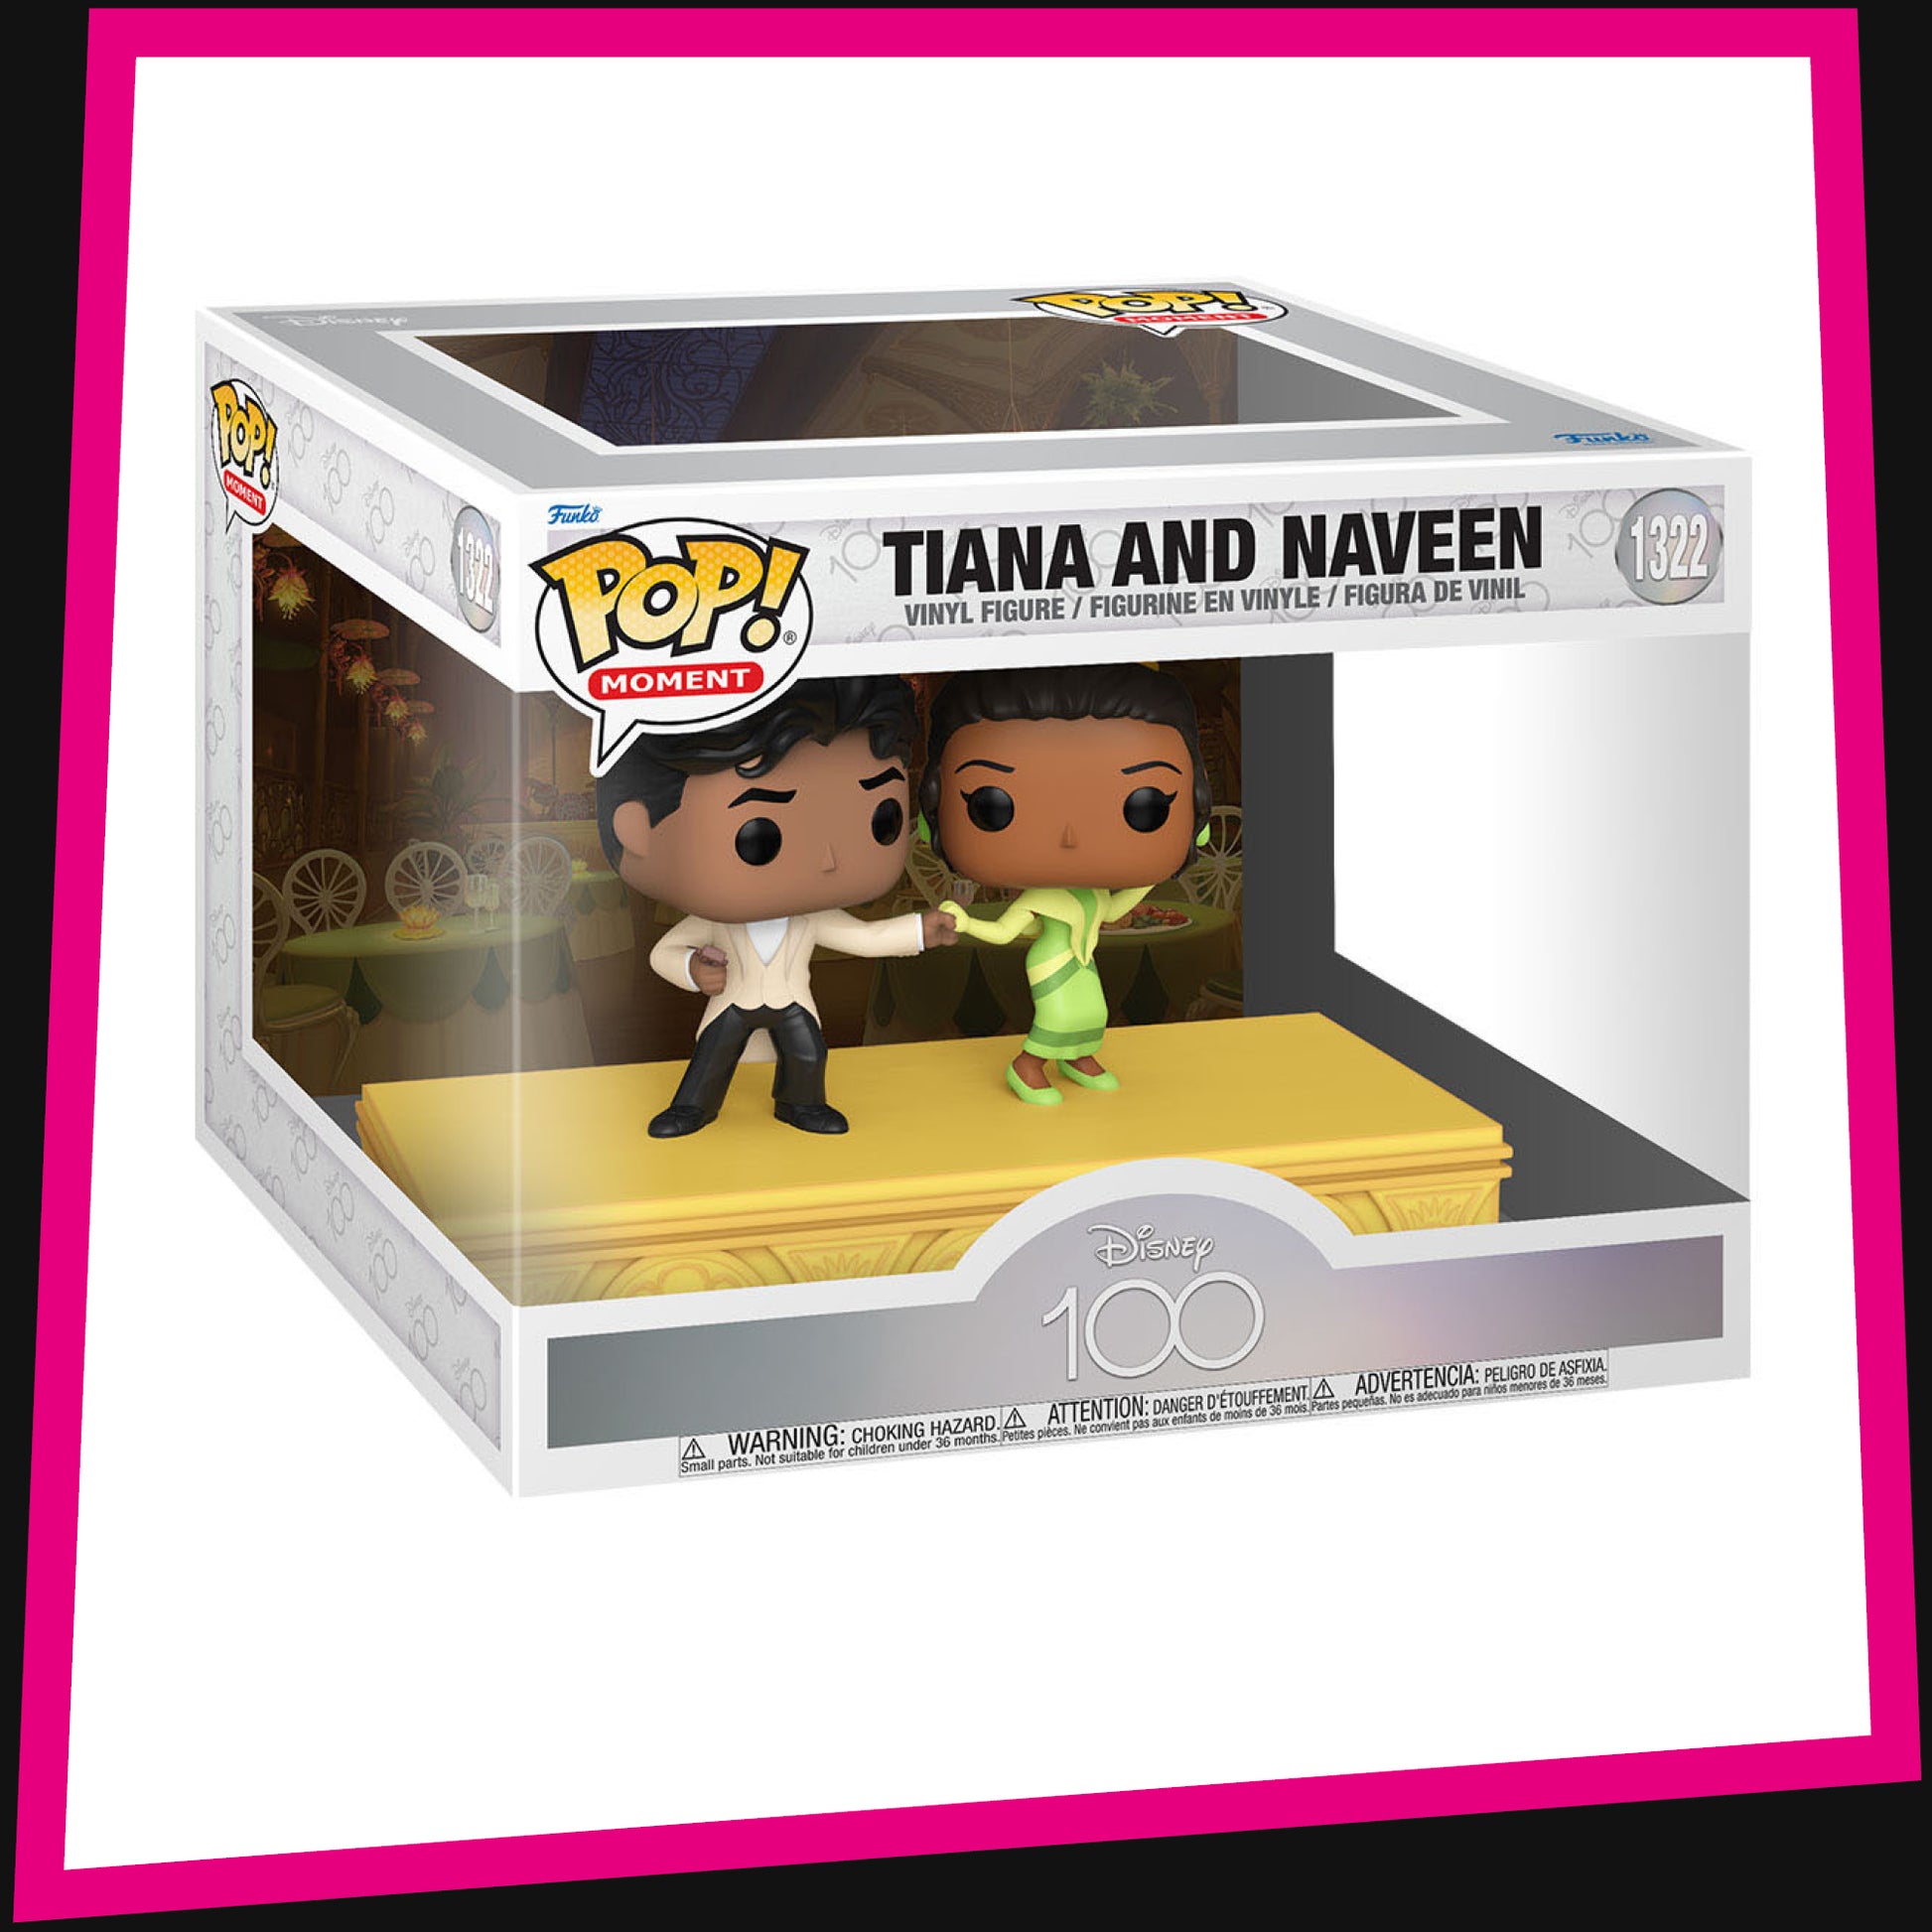 Tiana and Naveen & – Momen Anniversary #1322 - and Collectibles Pre-Owned Toy Disney Vinyl - Derek\'s Barn New POP! 100 Funko Toys